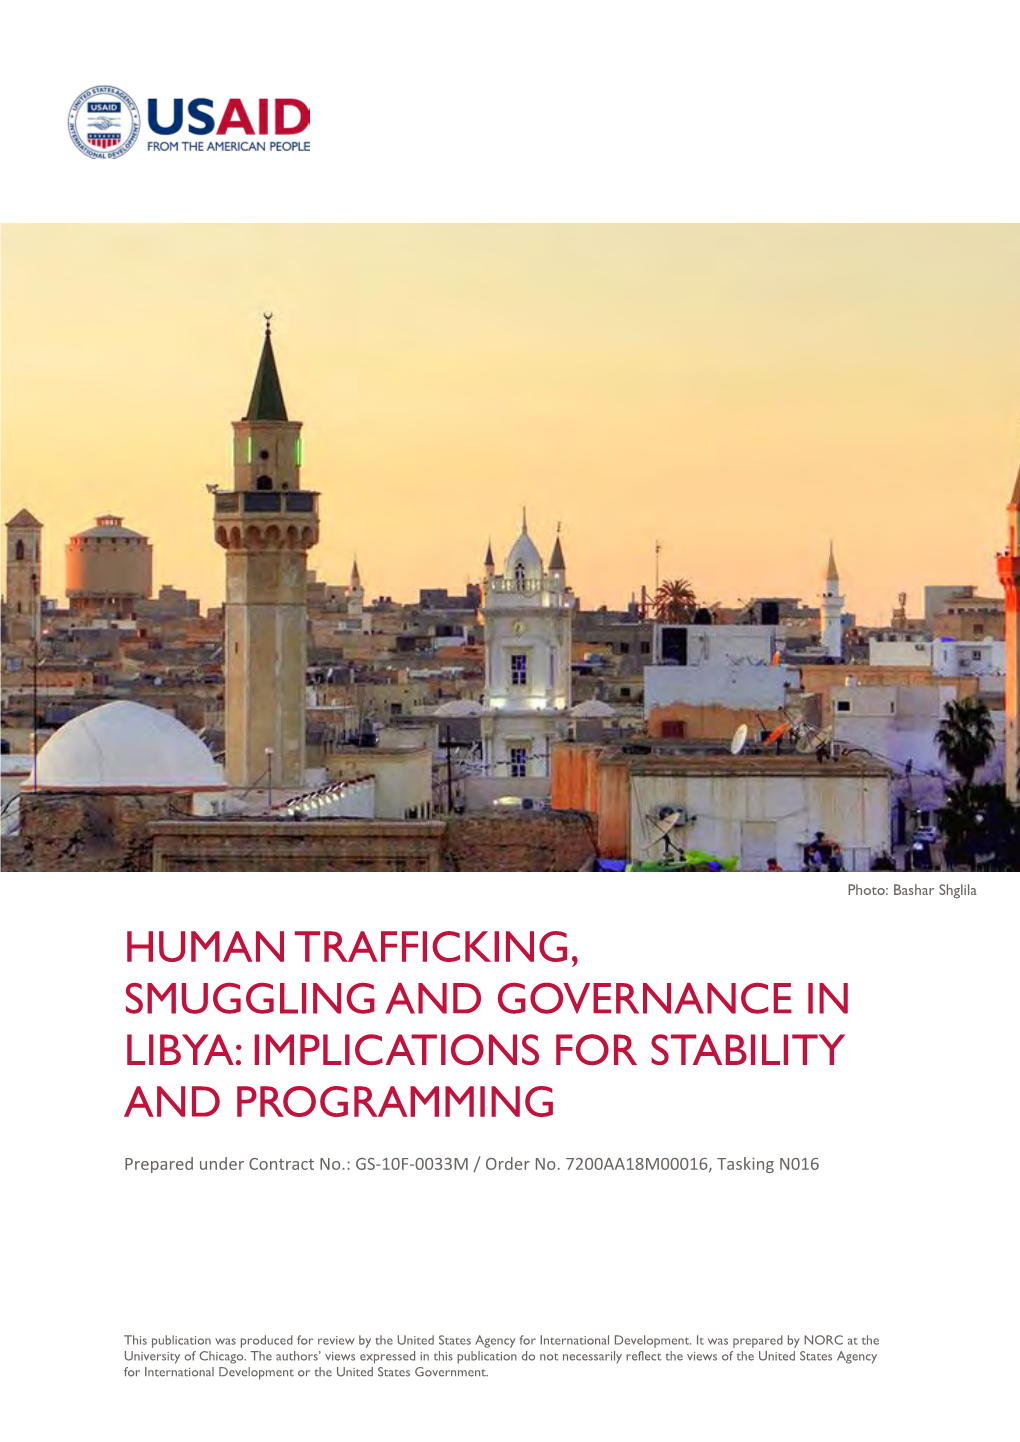 Human Trafficking, Smuggling and Governance in Libya: Implications for Stability and Programming